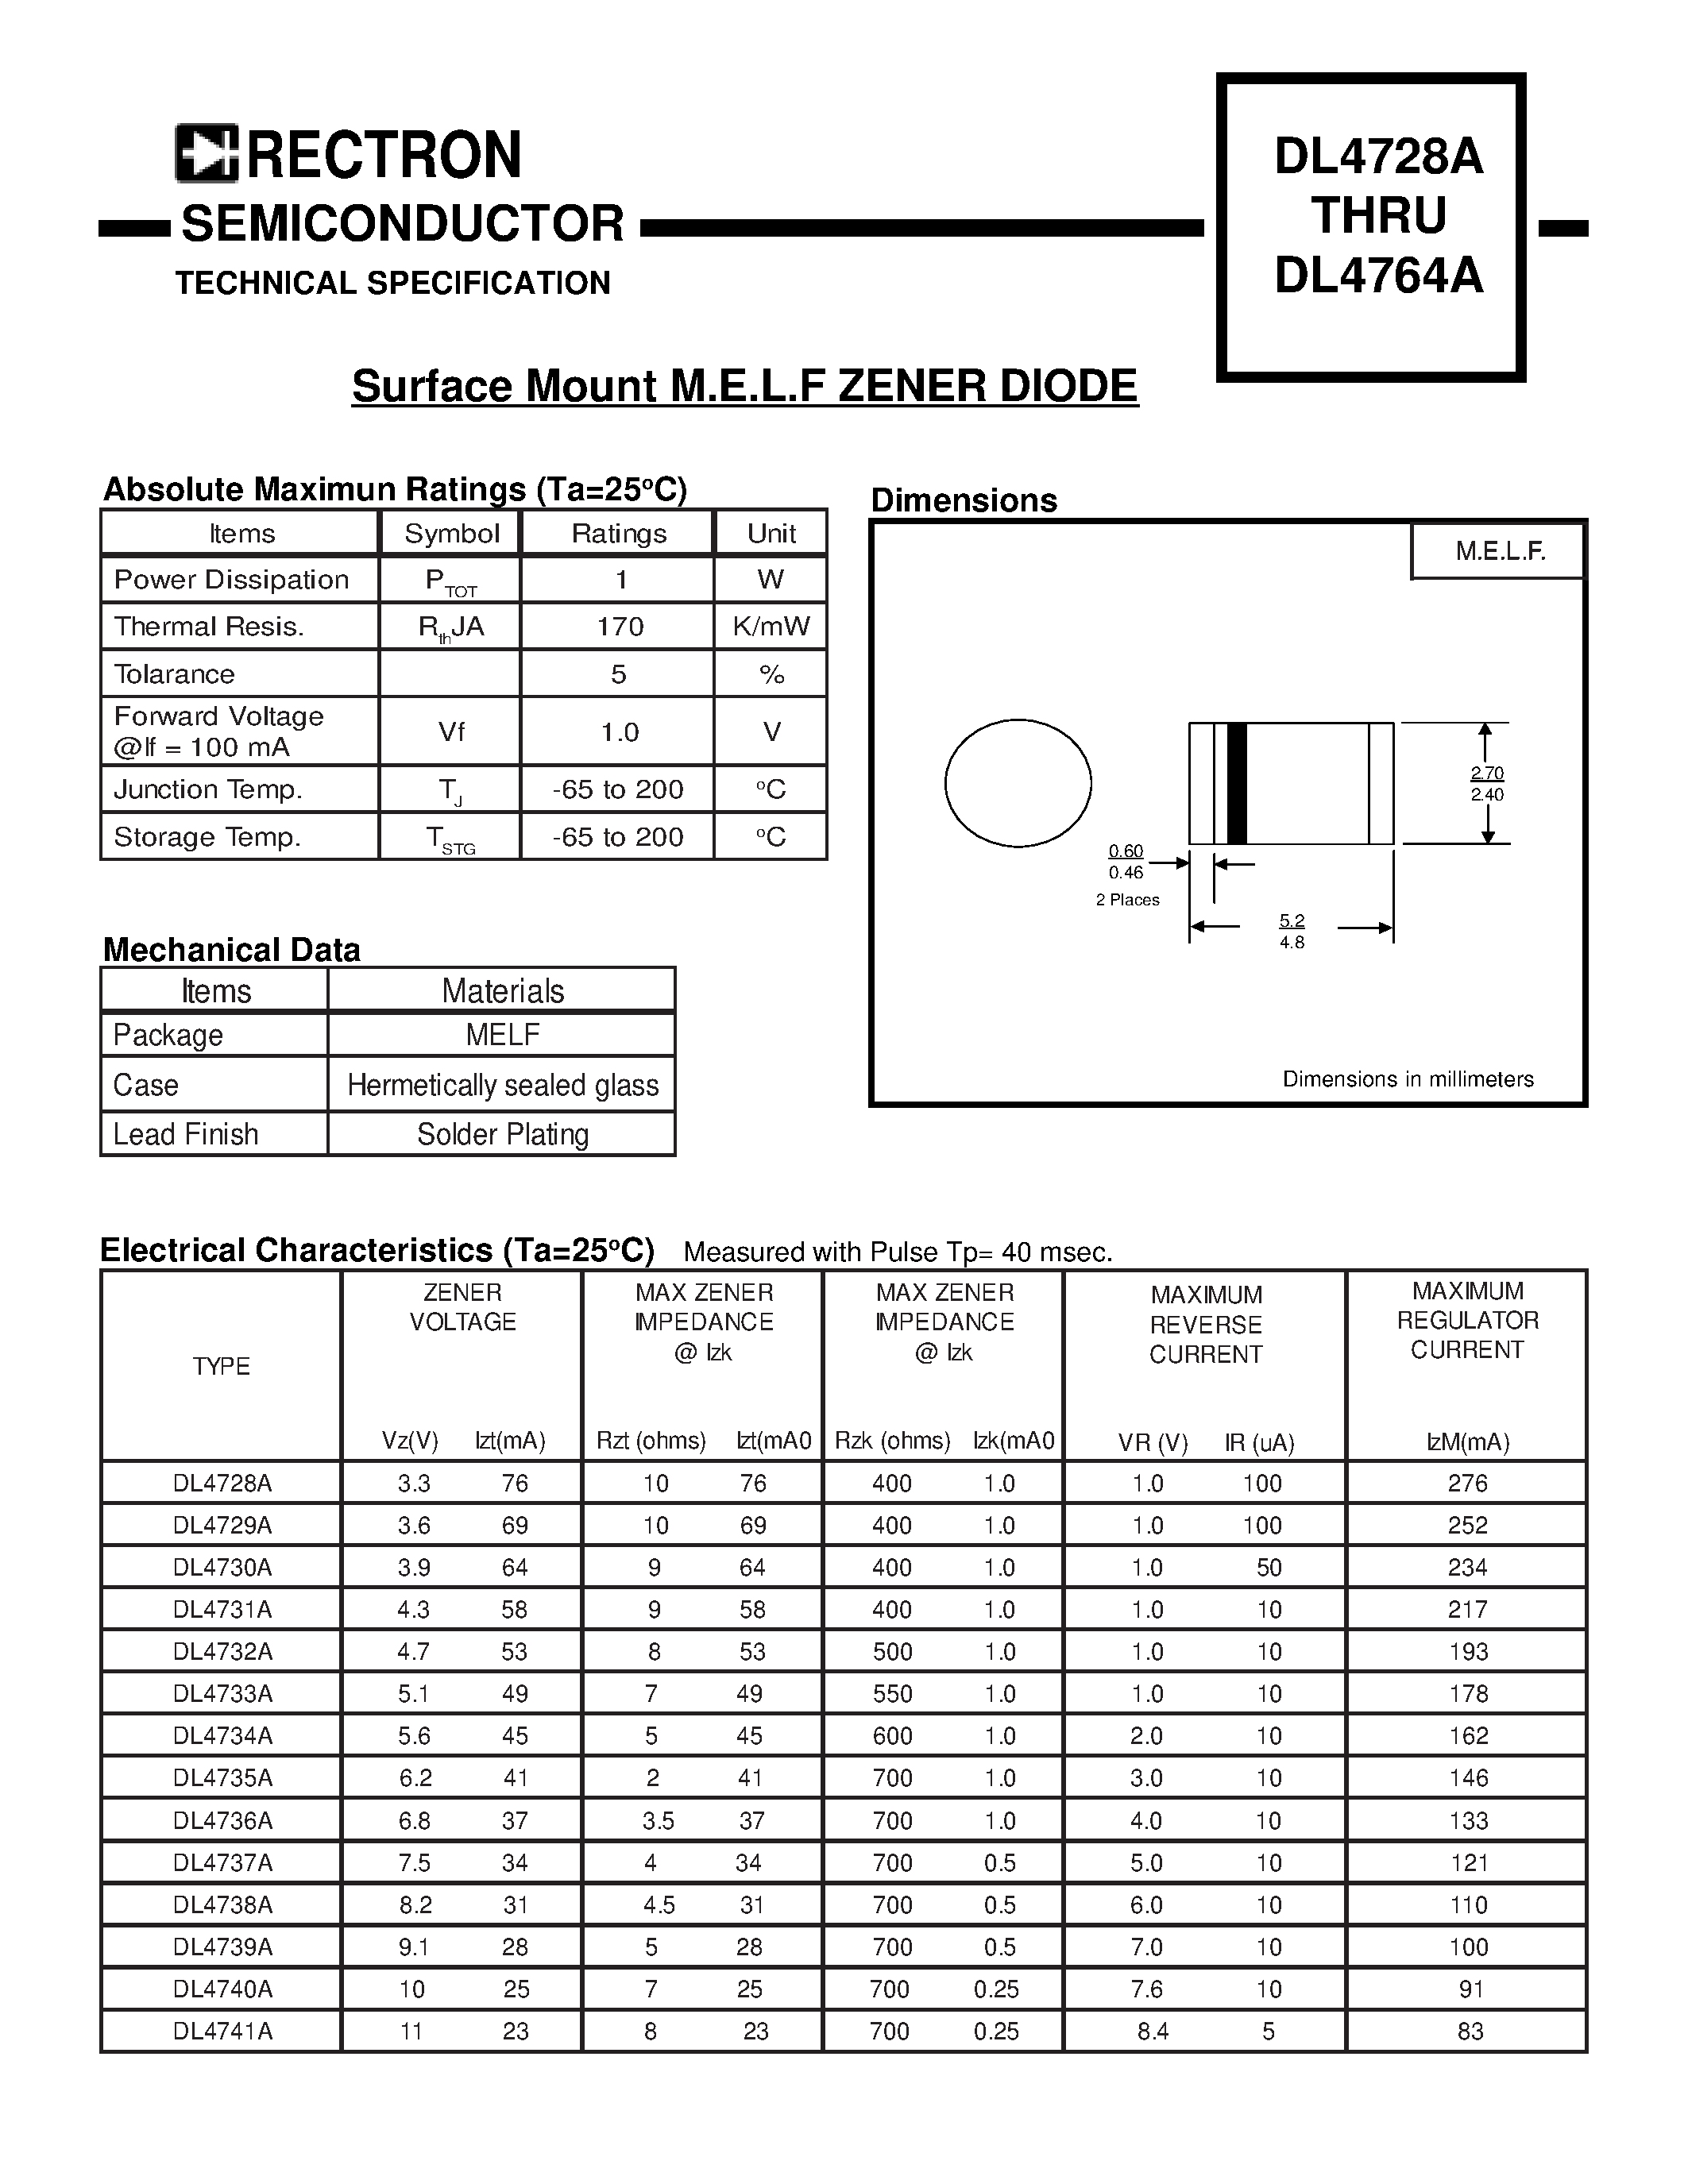 Datasheet DL4747A - Surface Mount M.E.L.F ZENER DIODE page 1